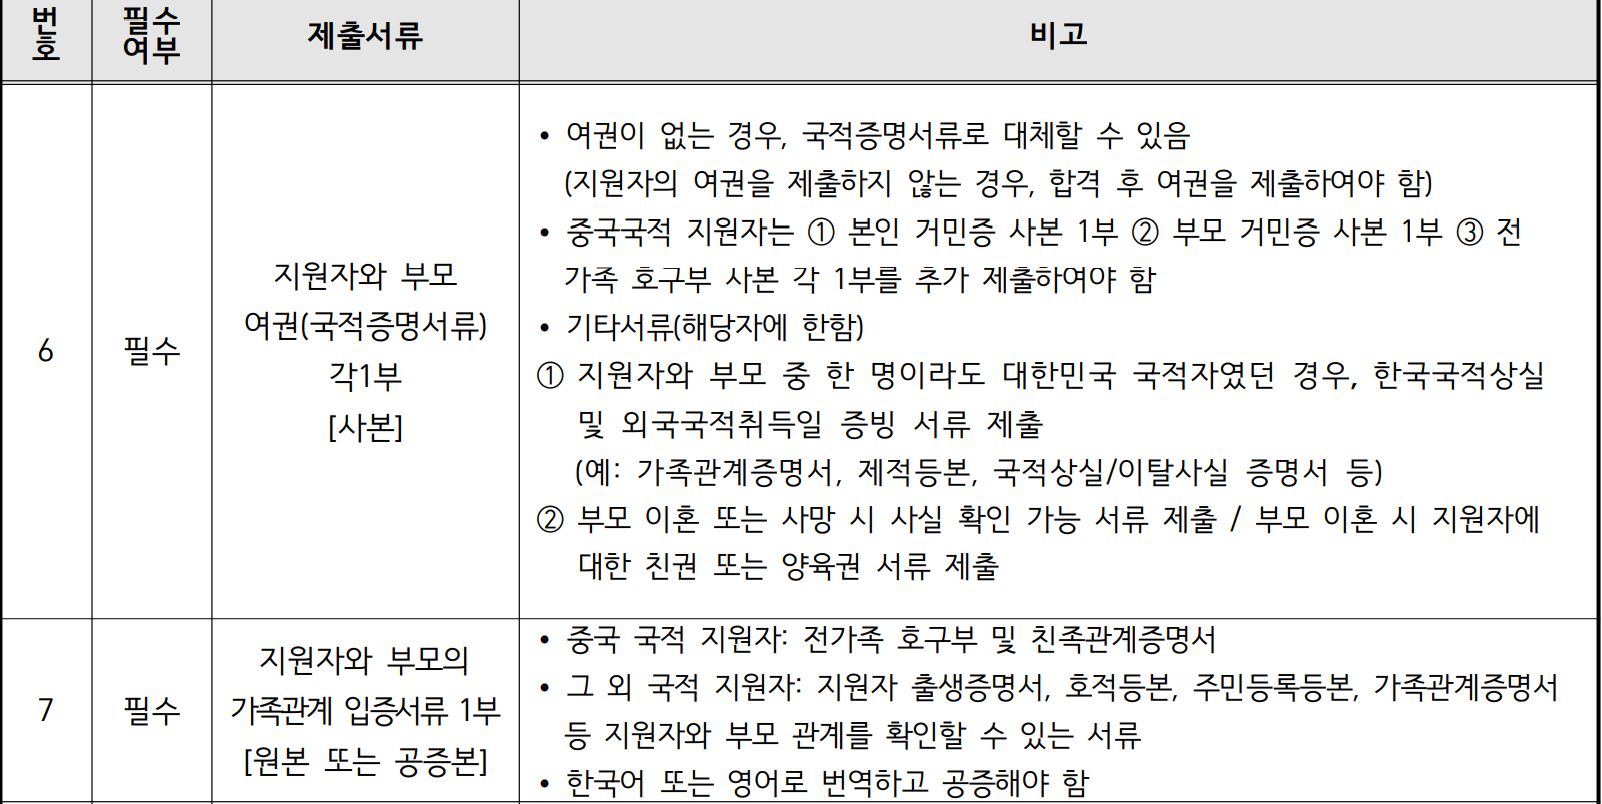 Ewha Womans University Foreign Student Admission Required Documents_English Version 이화여대 외국인전형 제출서류_영어본_05_제출서류.JPG